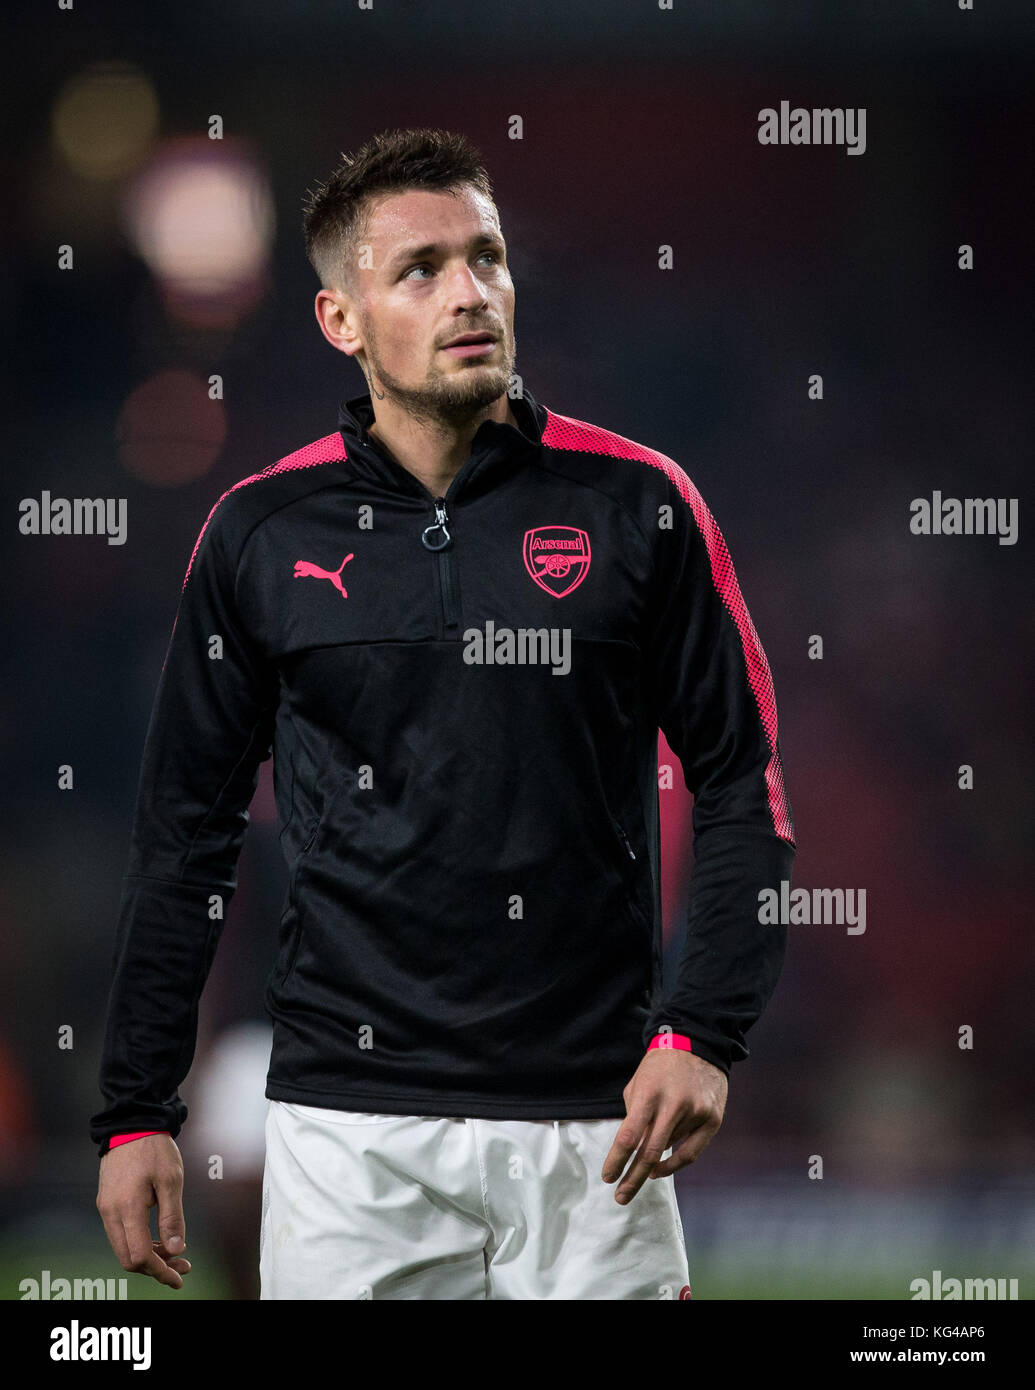 London, UK. 02nd Nov, 2017. Mathieu Debuchy of Arsenal ahead of the UEFA Europa League group stage match between Arsenal and FC Red Star Belgrade at the Emirates Stadium, London, England on 2 November 2017. Photo by PRiME Media Images. Credit: Andrew Rowland/Alamy Live News Stock Photo